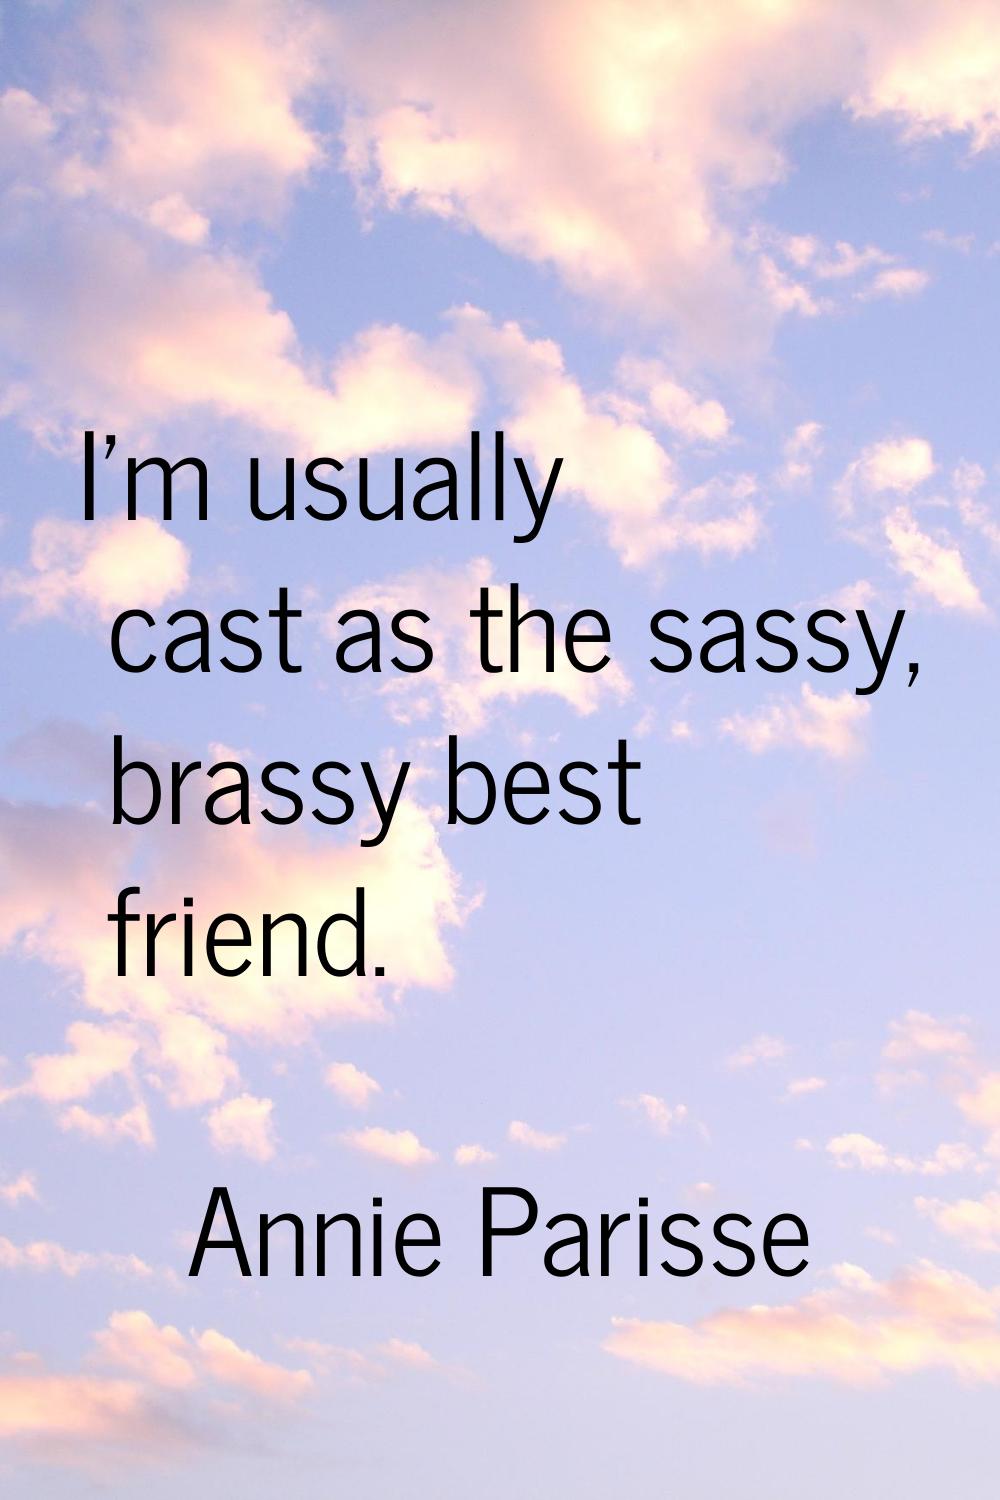 I'm usually cast as the sassy, brassy best friend.